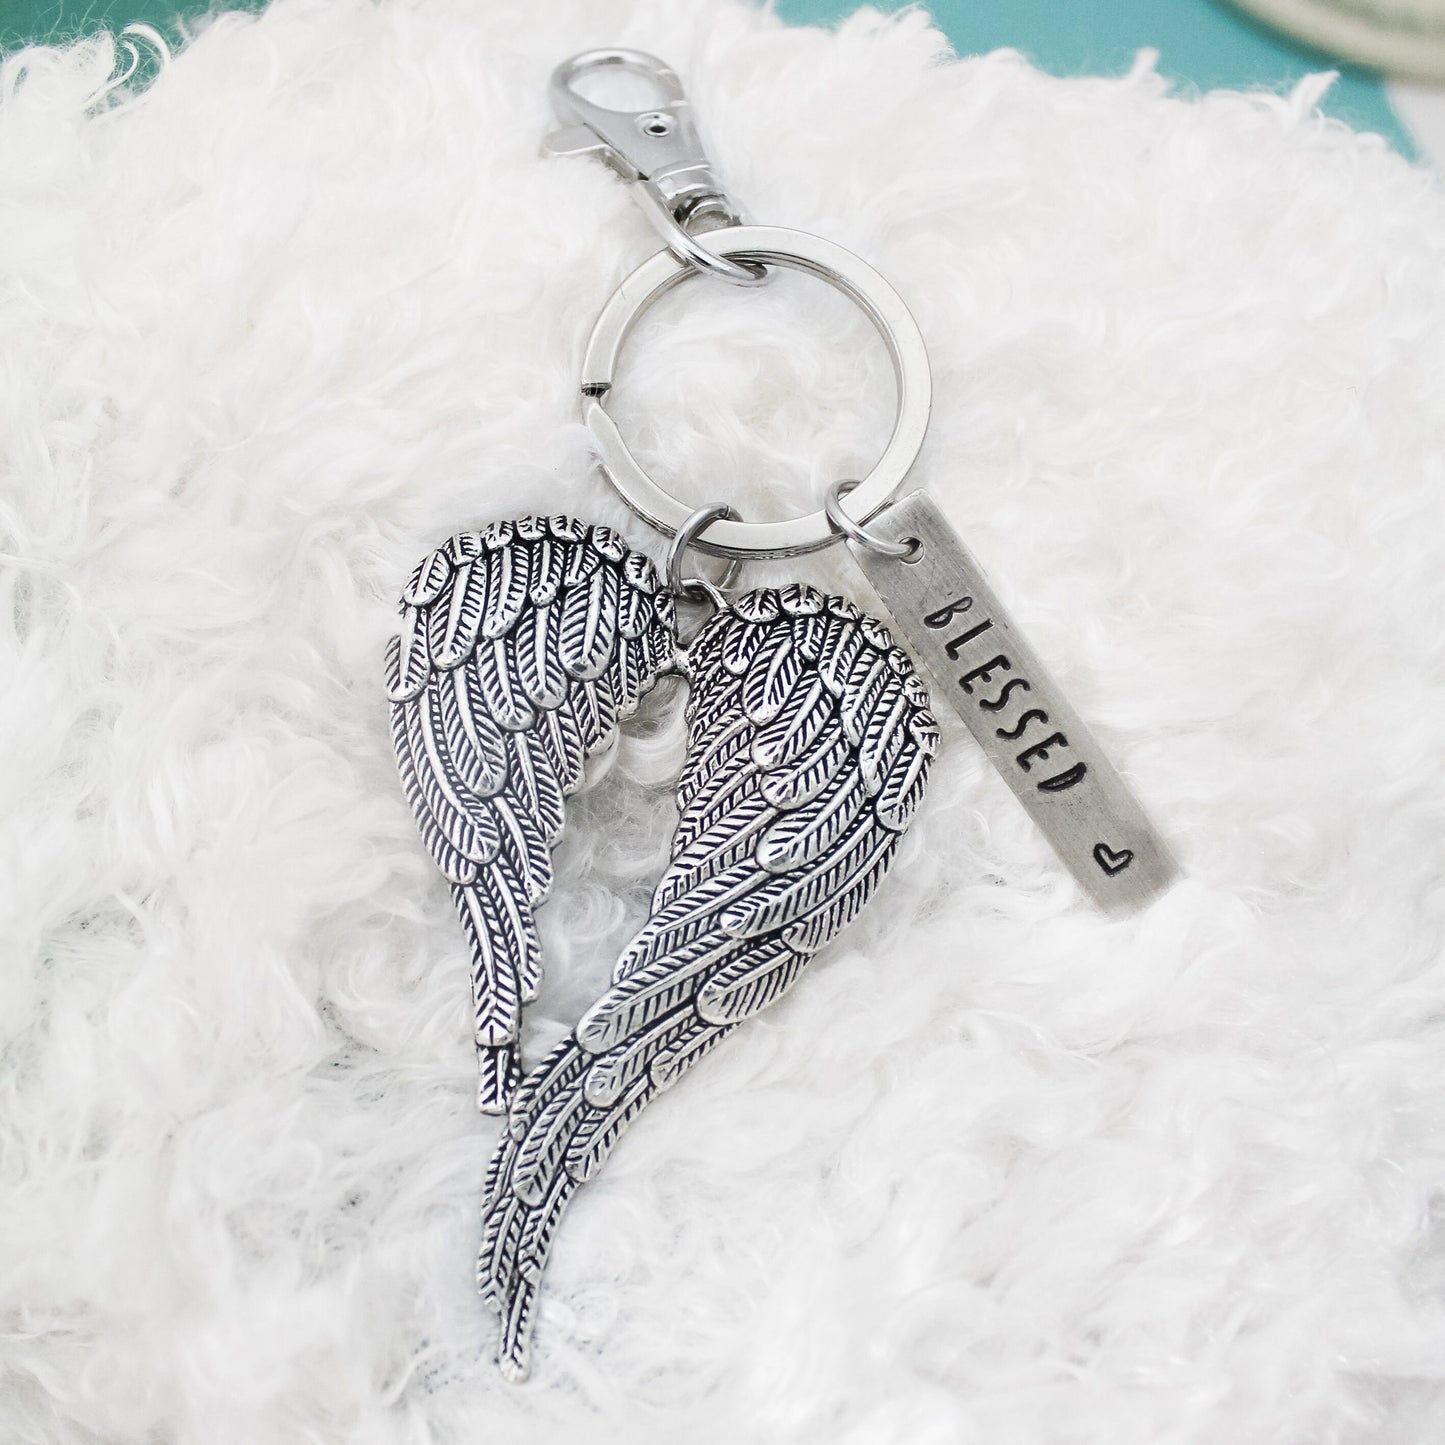 Angel Wing Key Chain, Angel Wing Blessed Heart KeyChain, Angel Wing Key Fob, Angel Key Ring, Double Angel Wings,  Hand Stamped Personalized